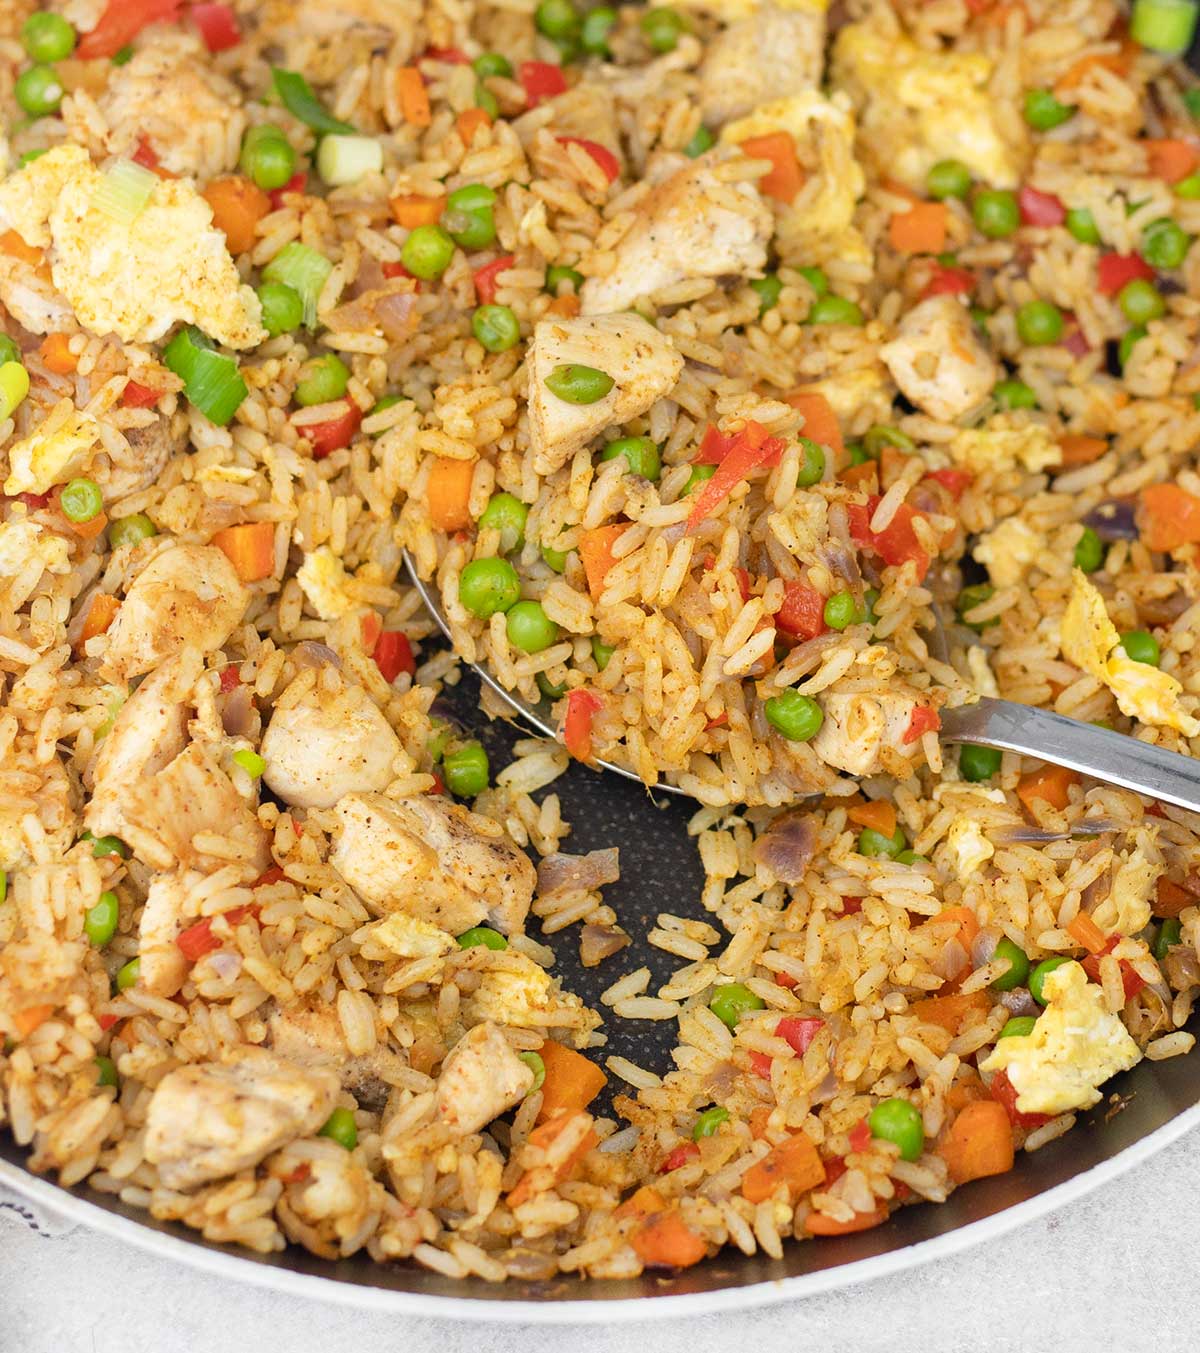 Curry fried rice with chicken and vegetables.